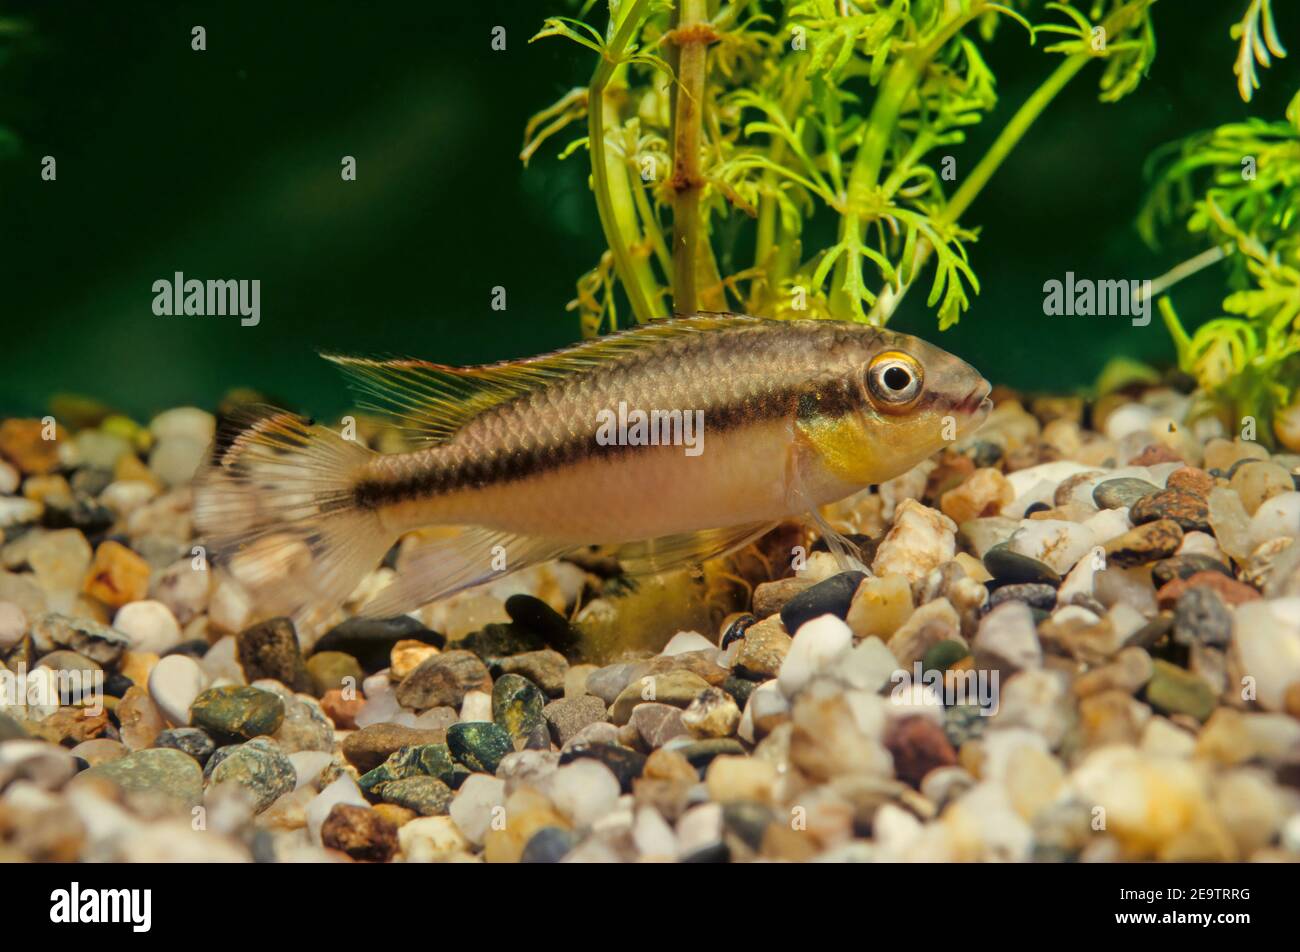 Pelvicachromis pulcher is a freshwater fish of the cichlid family, endemic to Nigeria and Cameroon. Stock Photo